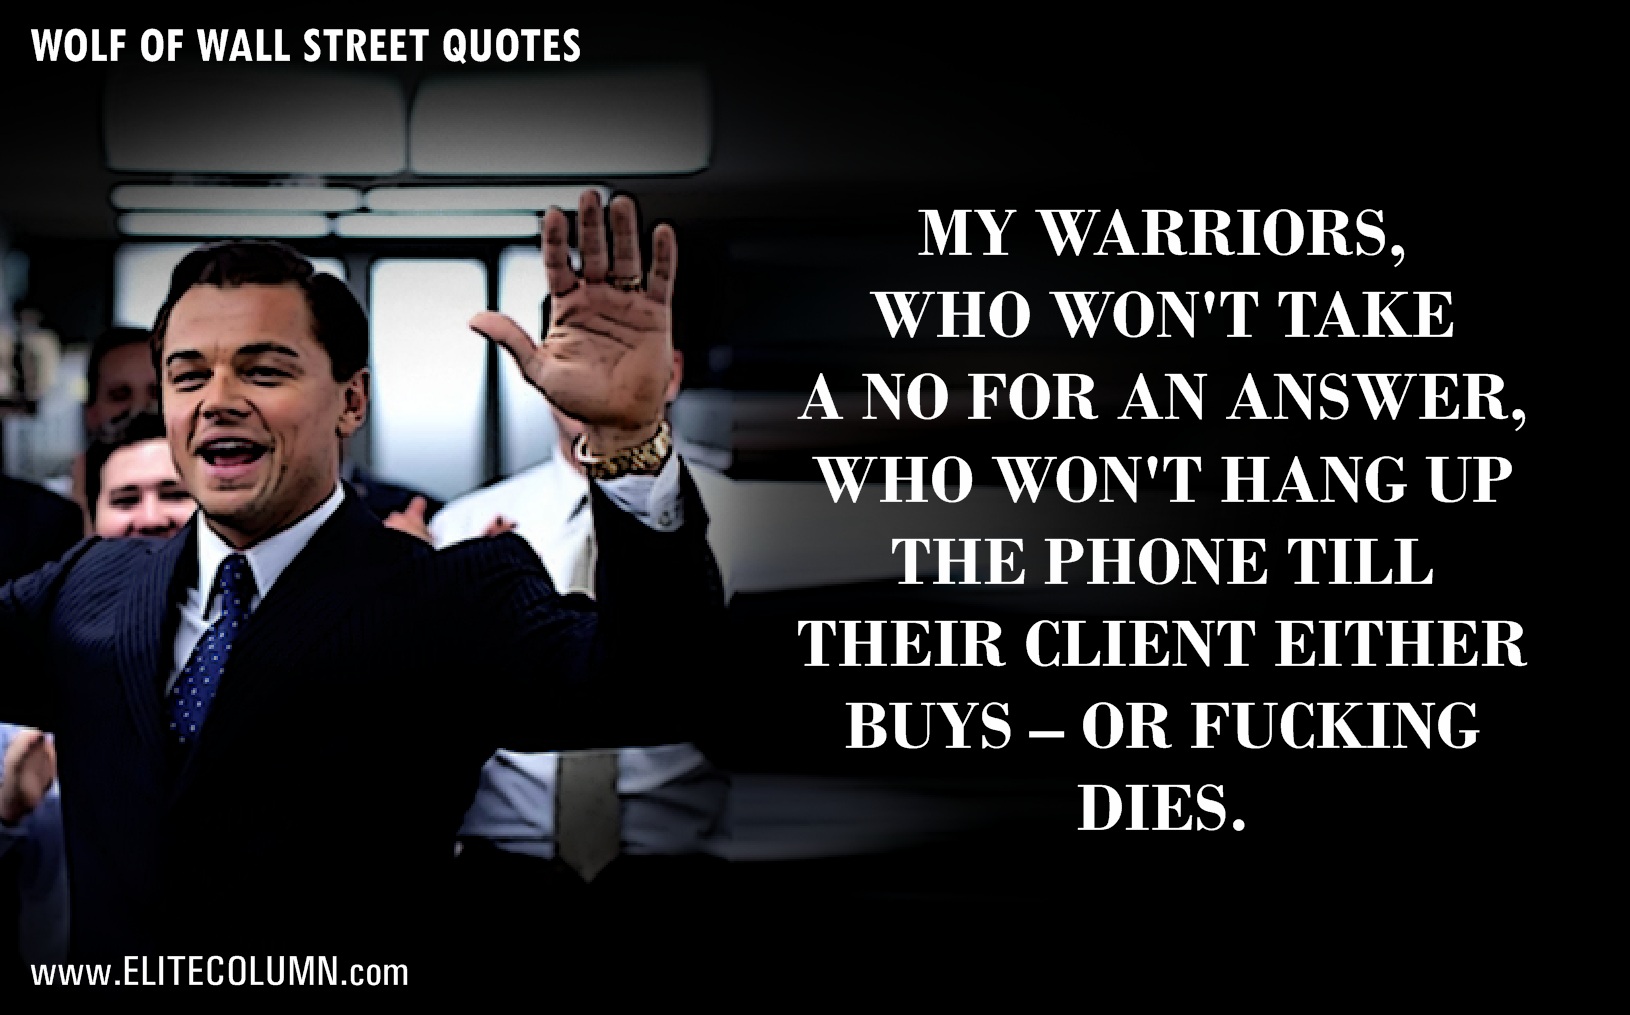 The Wolf Of Wall Street Quotes (8)